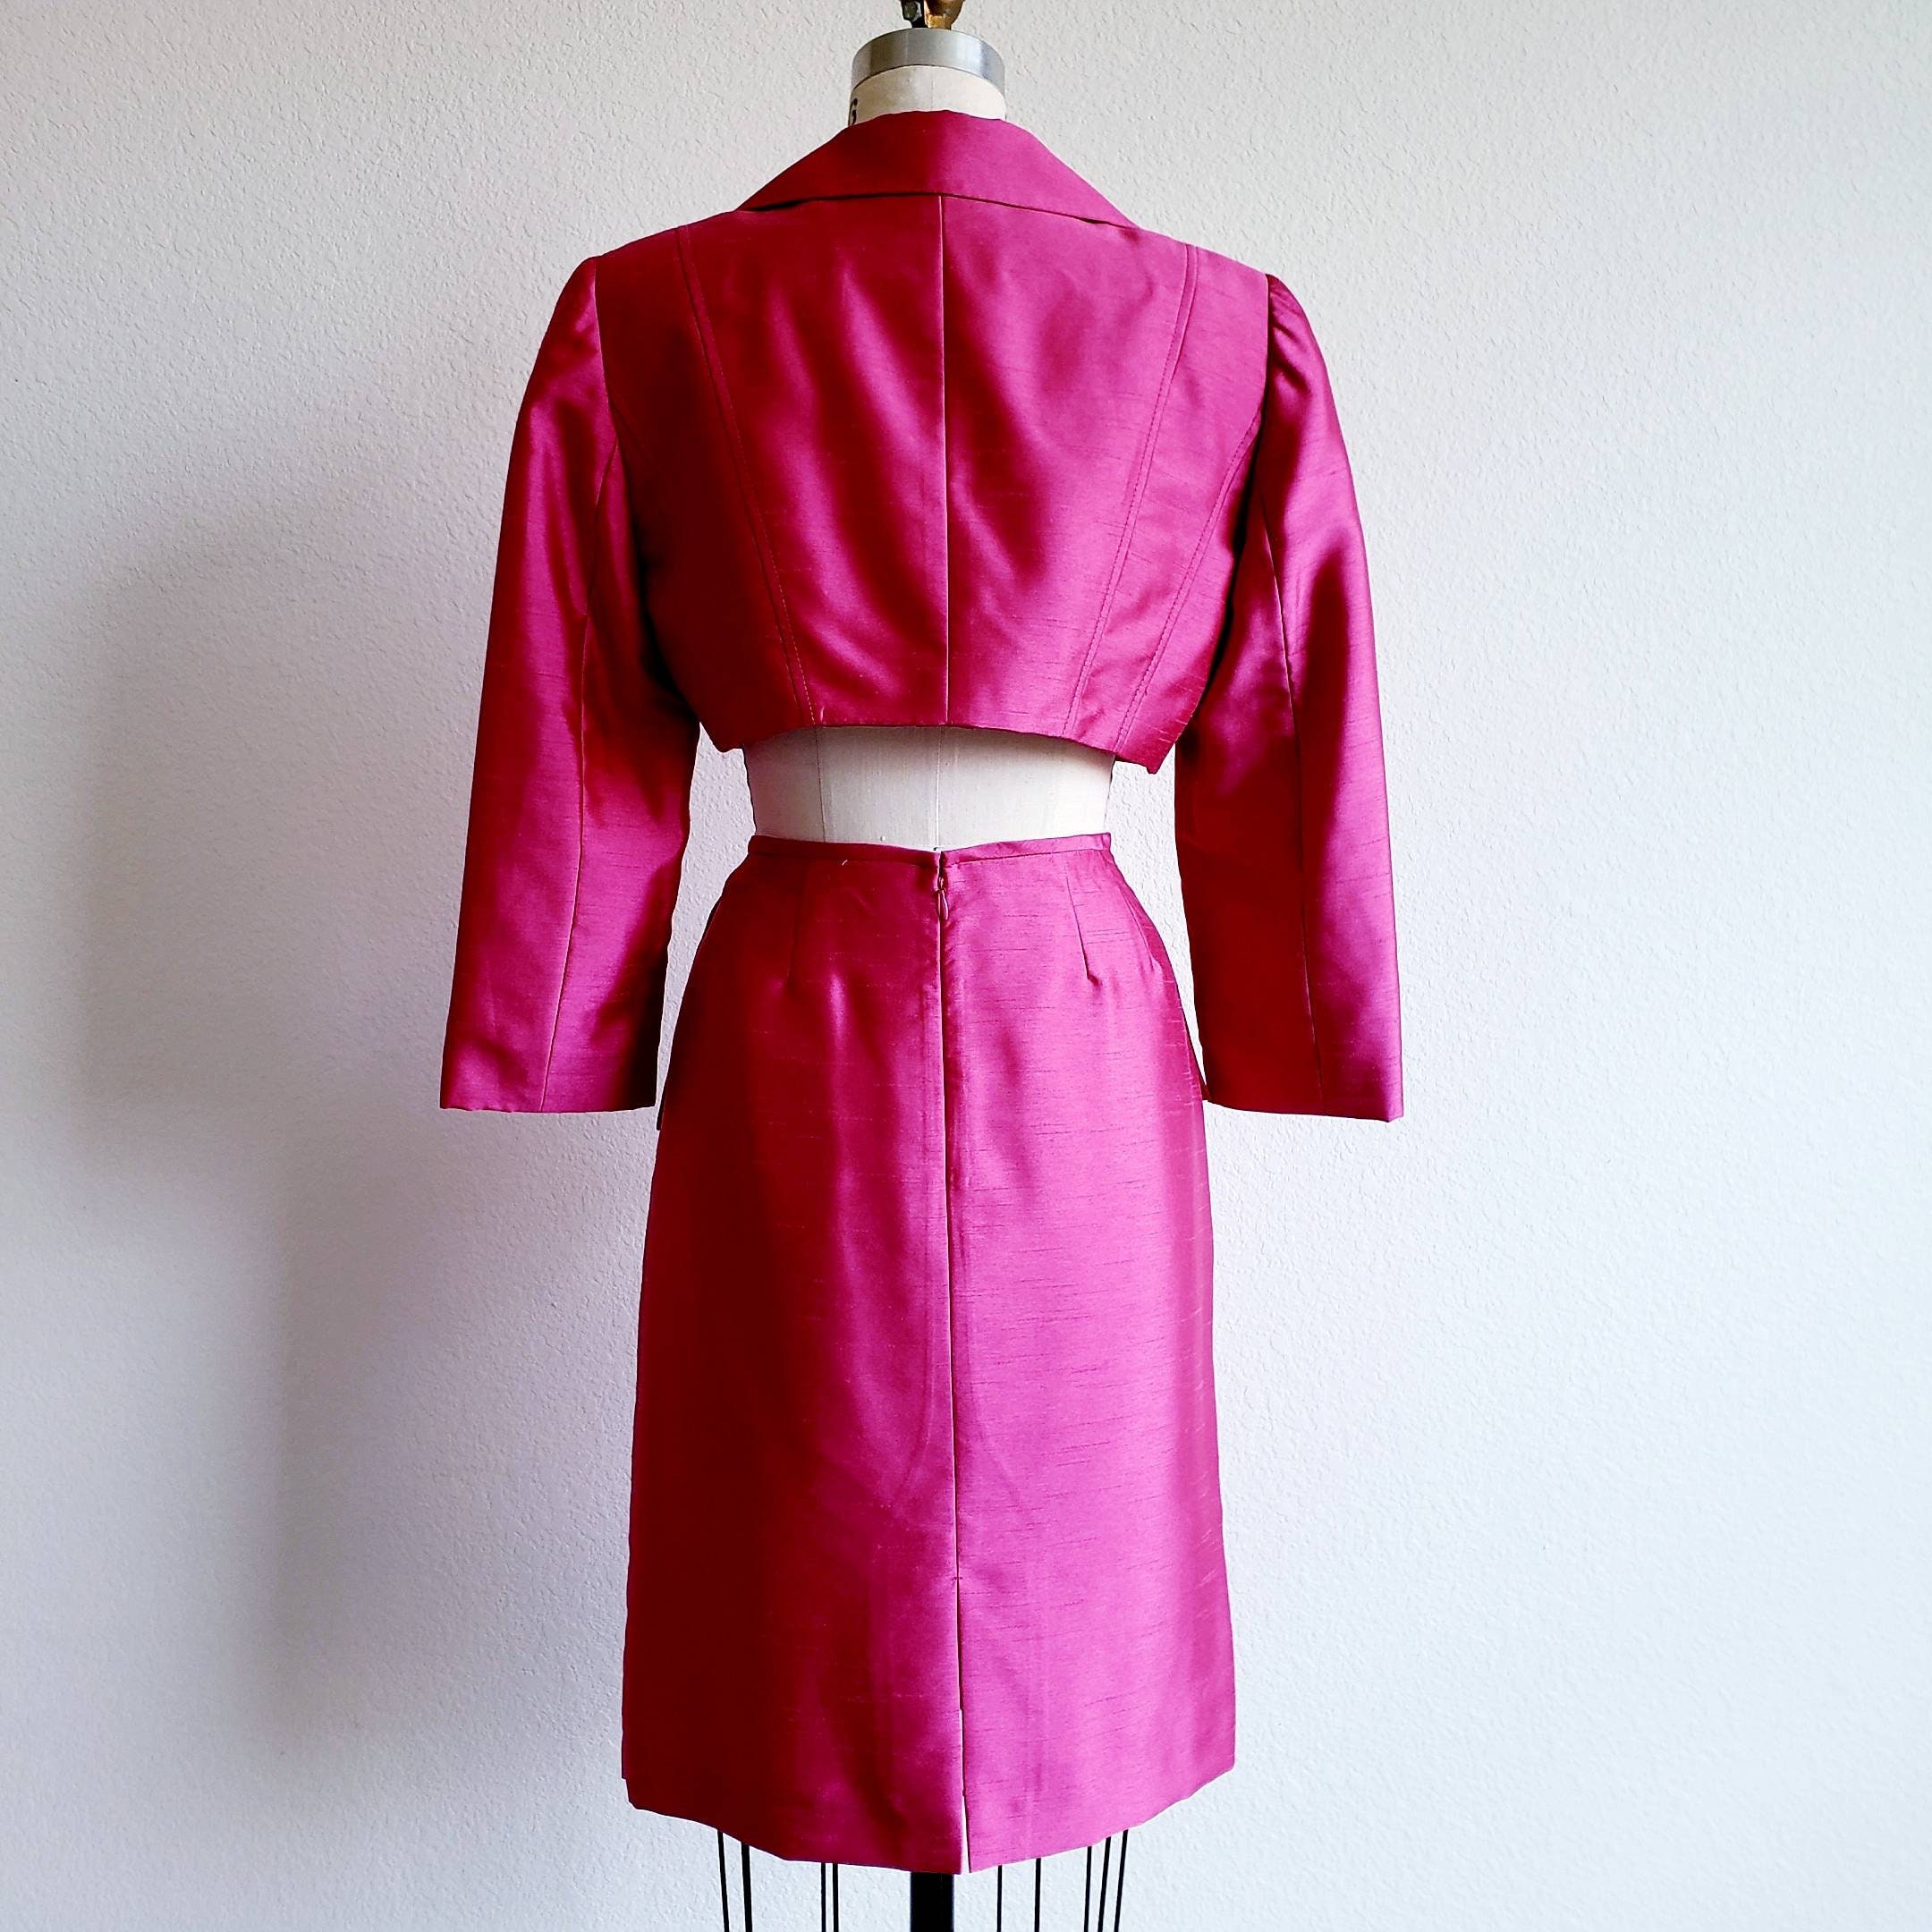 Vintage Upcycled Tahari Pink Fuschia Suit With Cropped Jacket - Etsy